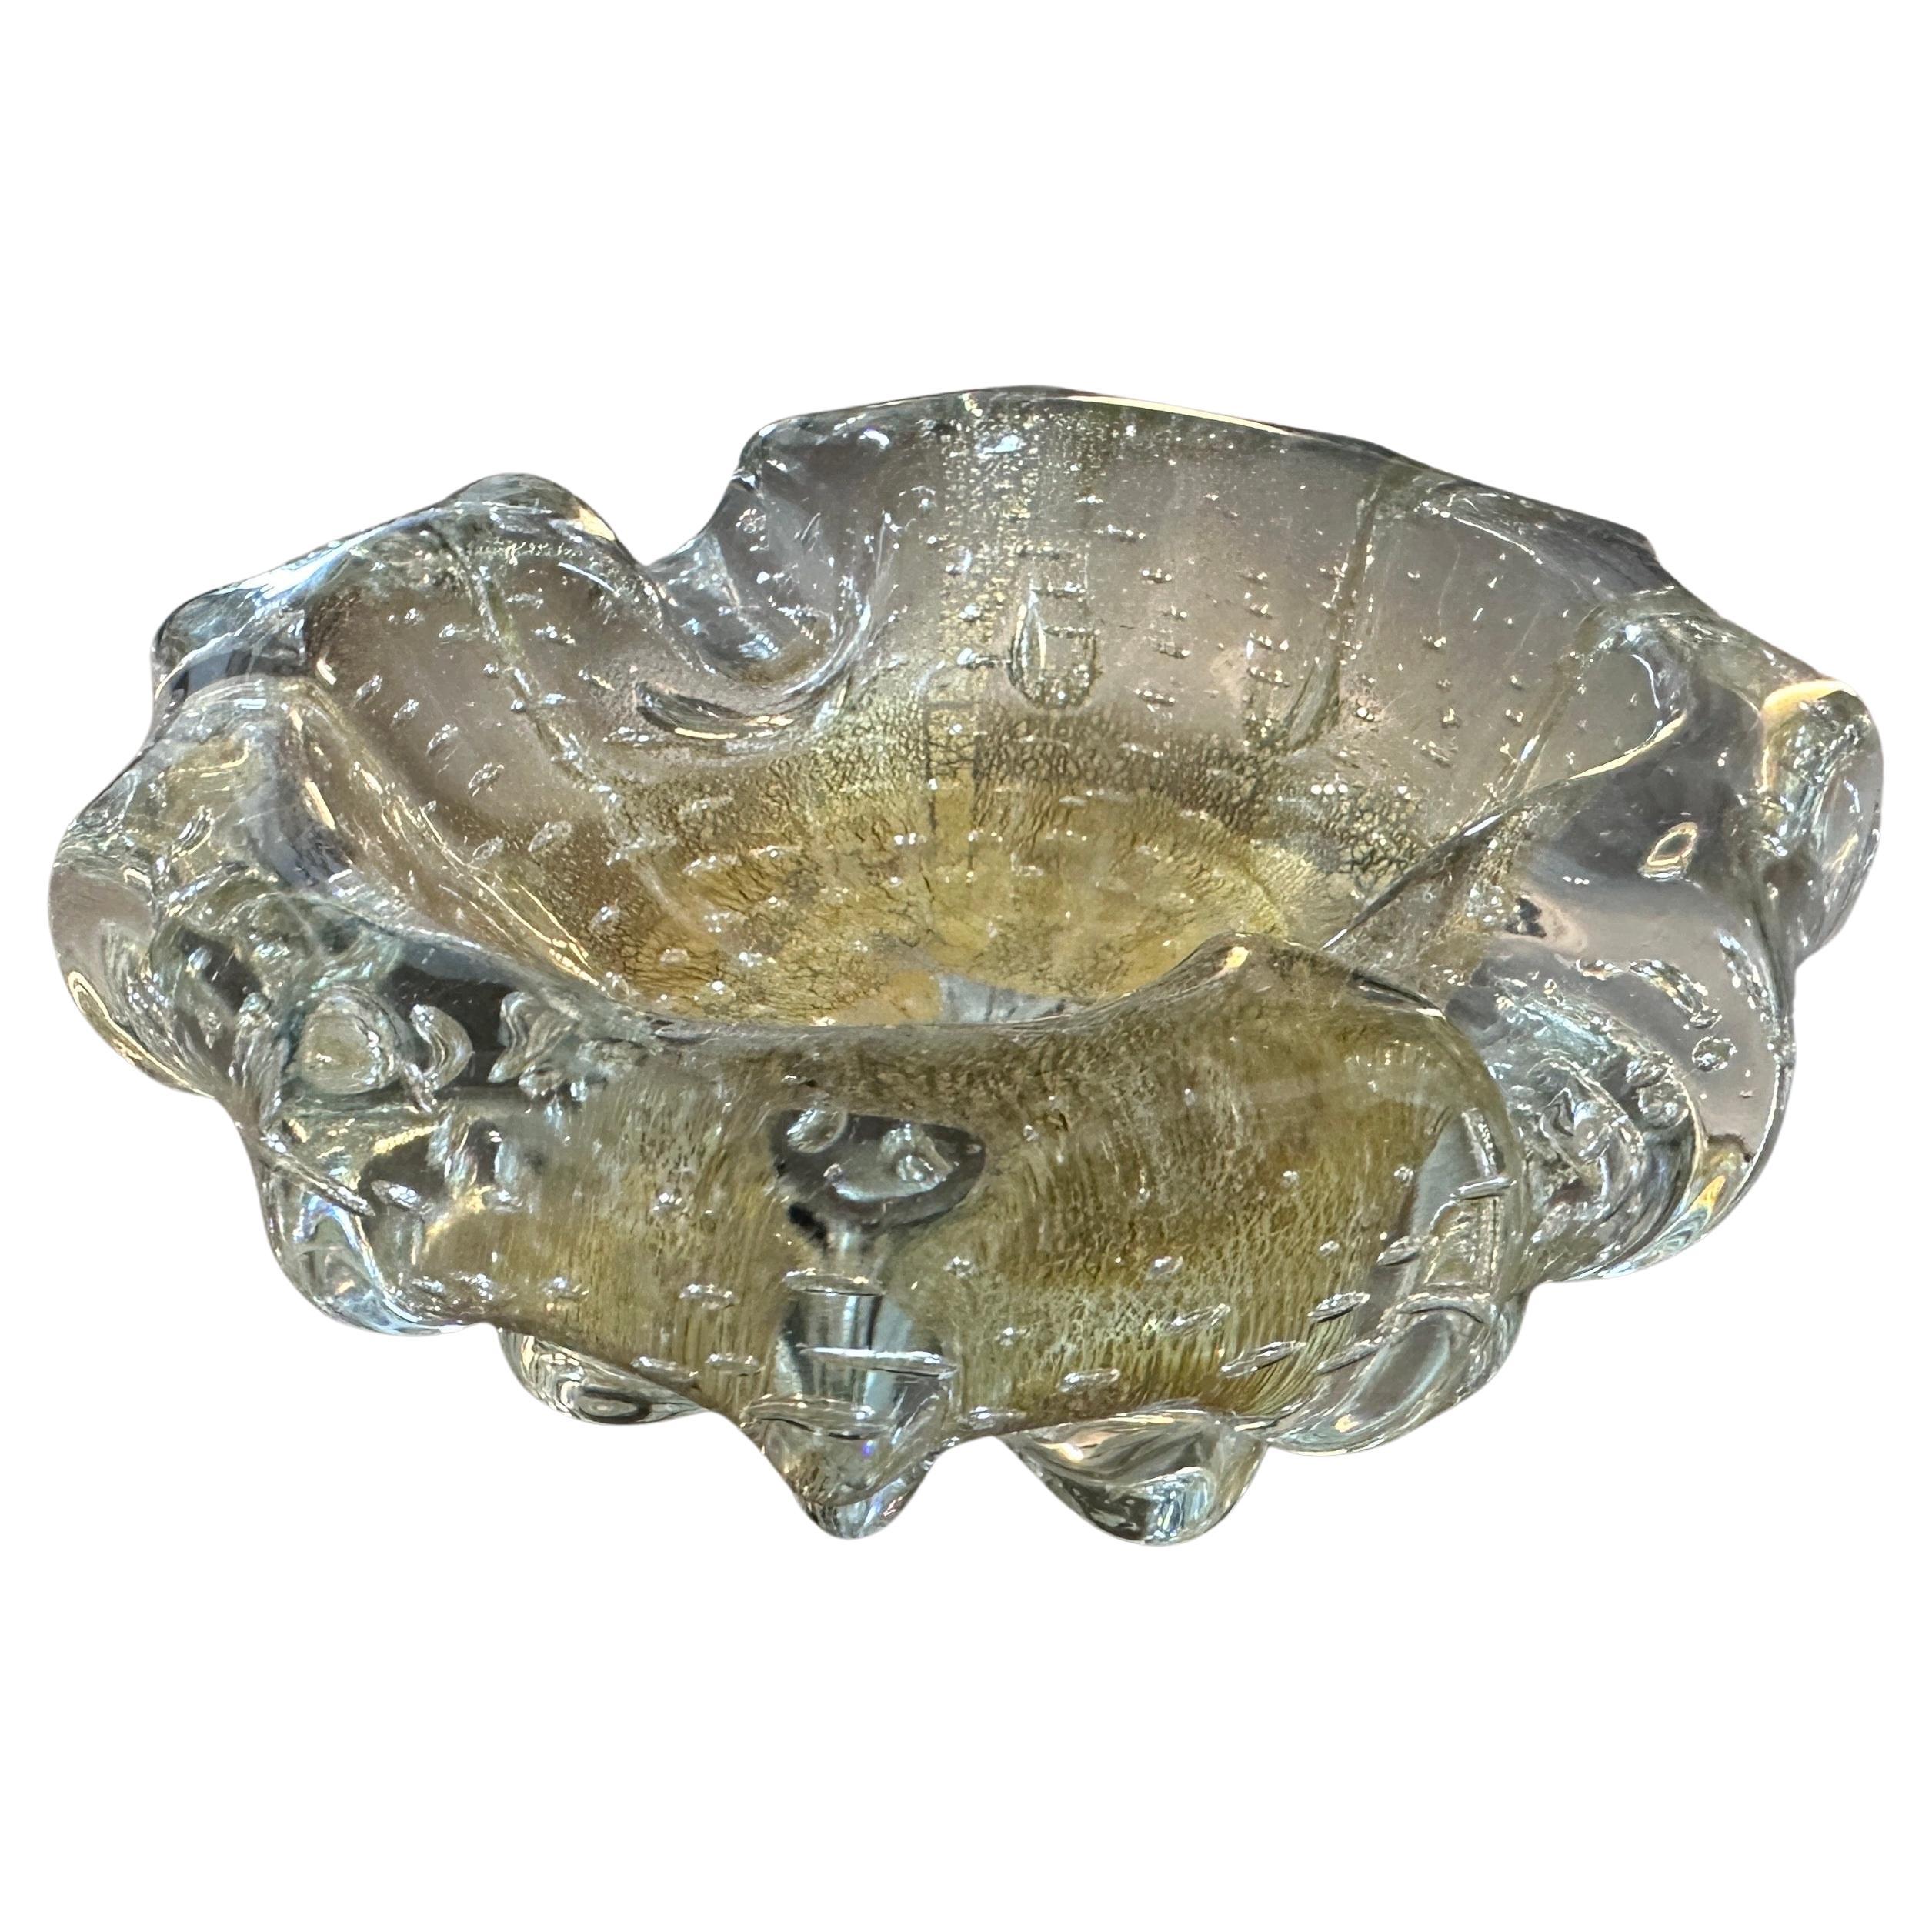 A murano glass ashtray designed and manufactured in Italy by Barovier in the Sixties, it's in very good condition. This Murano Glass Ashtray by Barovier is a fascinating and collectible piece of Murano glassware. Murano glass, produced on the island